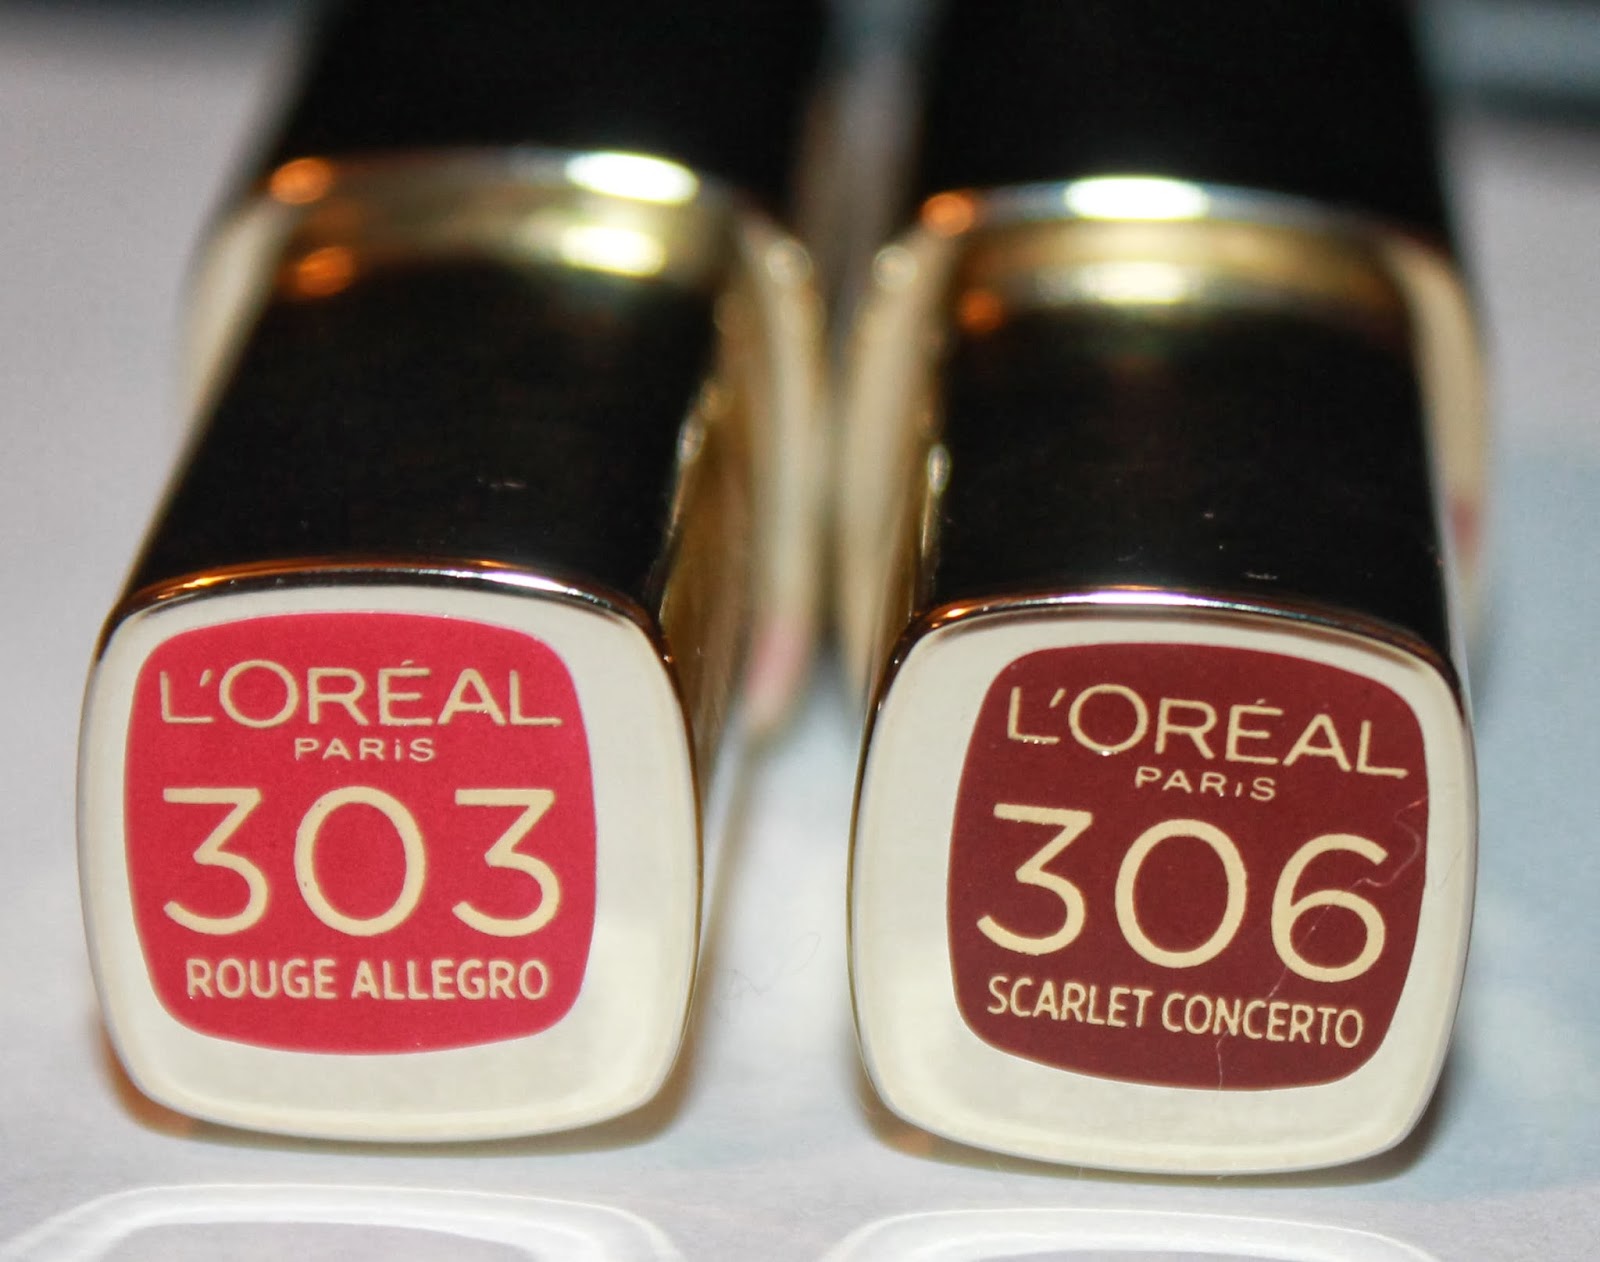 The Dark Side of Beauty: Review: L'oreal Colour Riche Extraordinaire